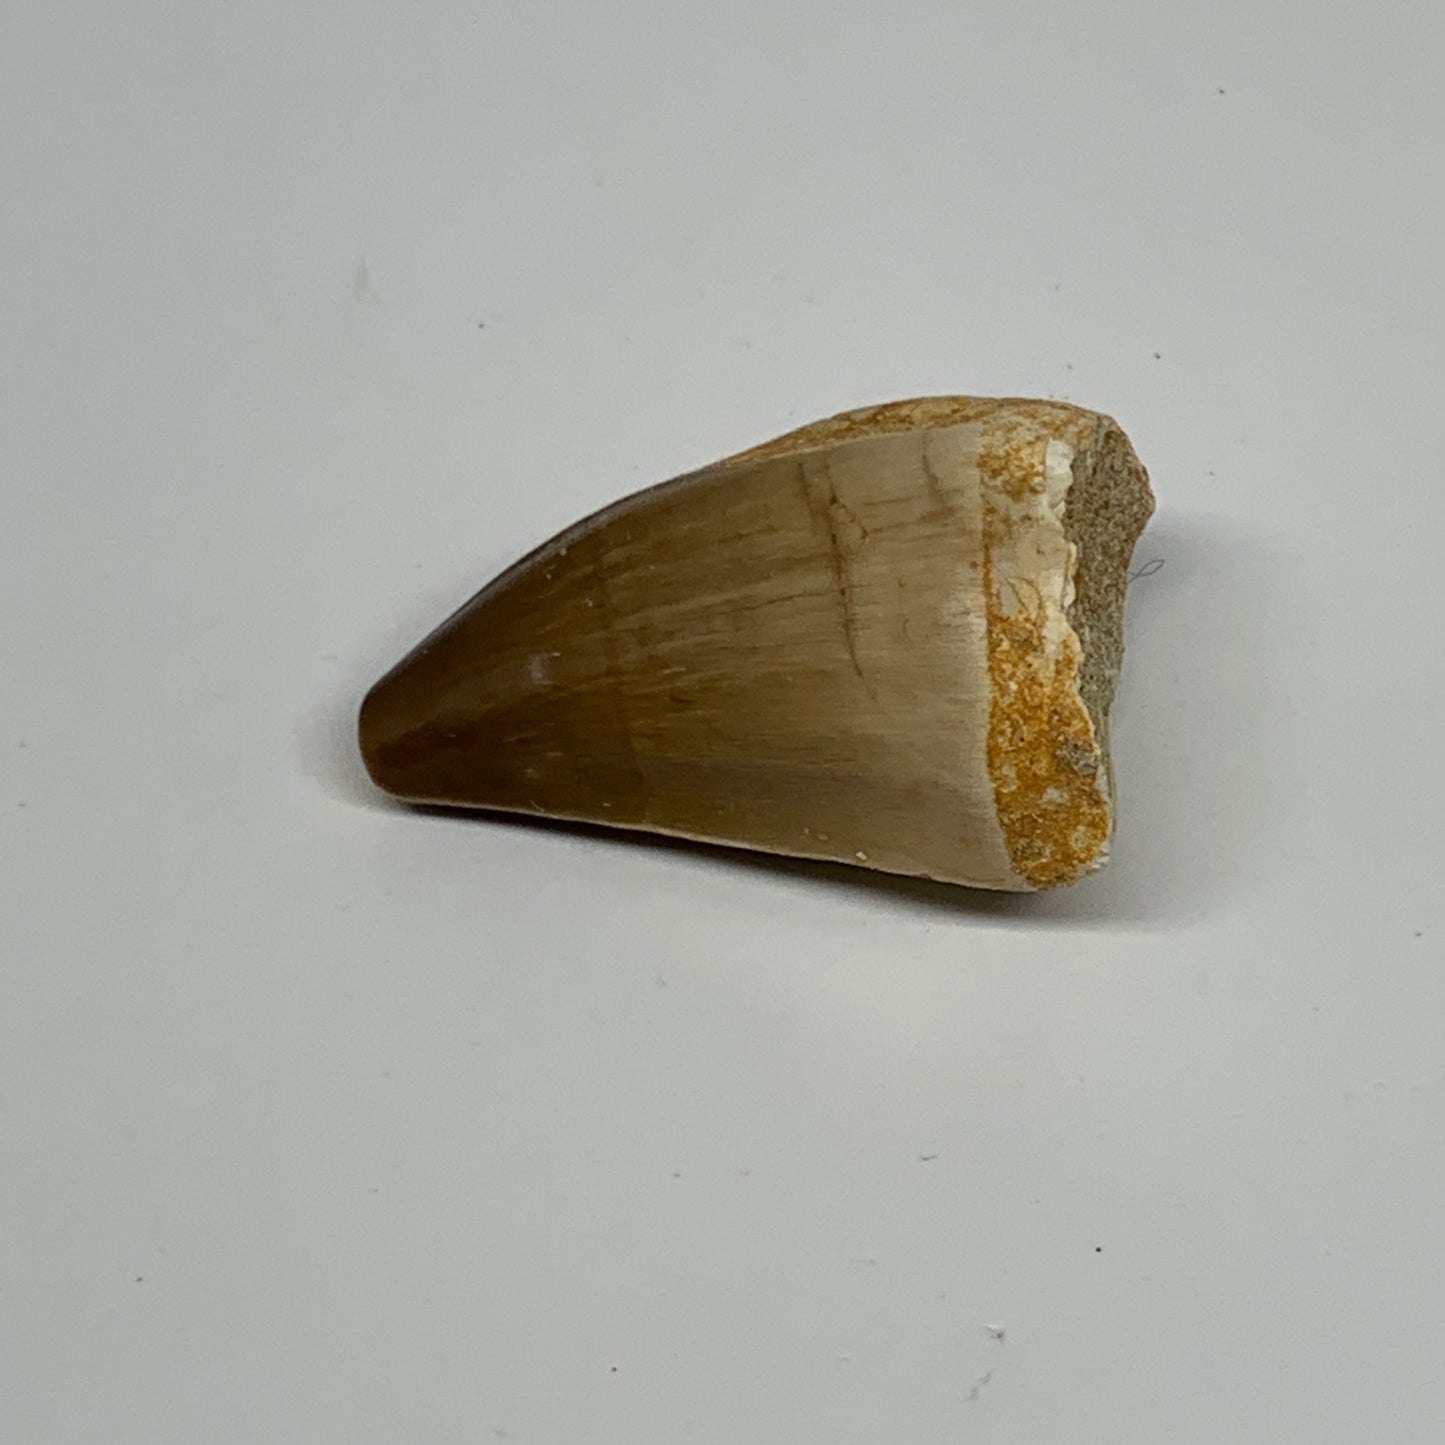 24.6g,1.8"X1.1"x0.9" Fossil Mosasaur Tooth reptiles, Cretaceous @Morocco, B23769